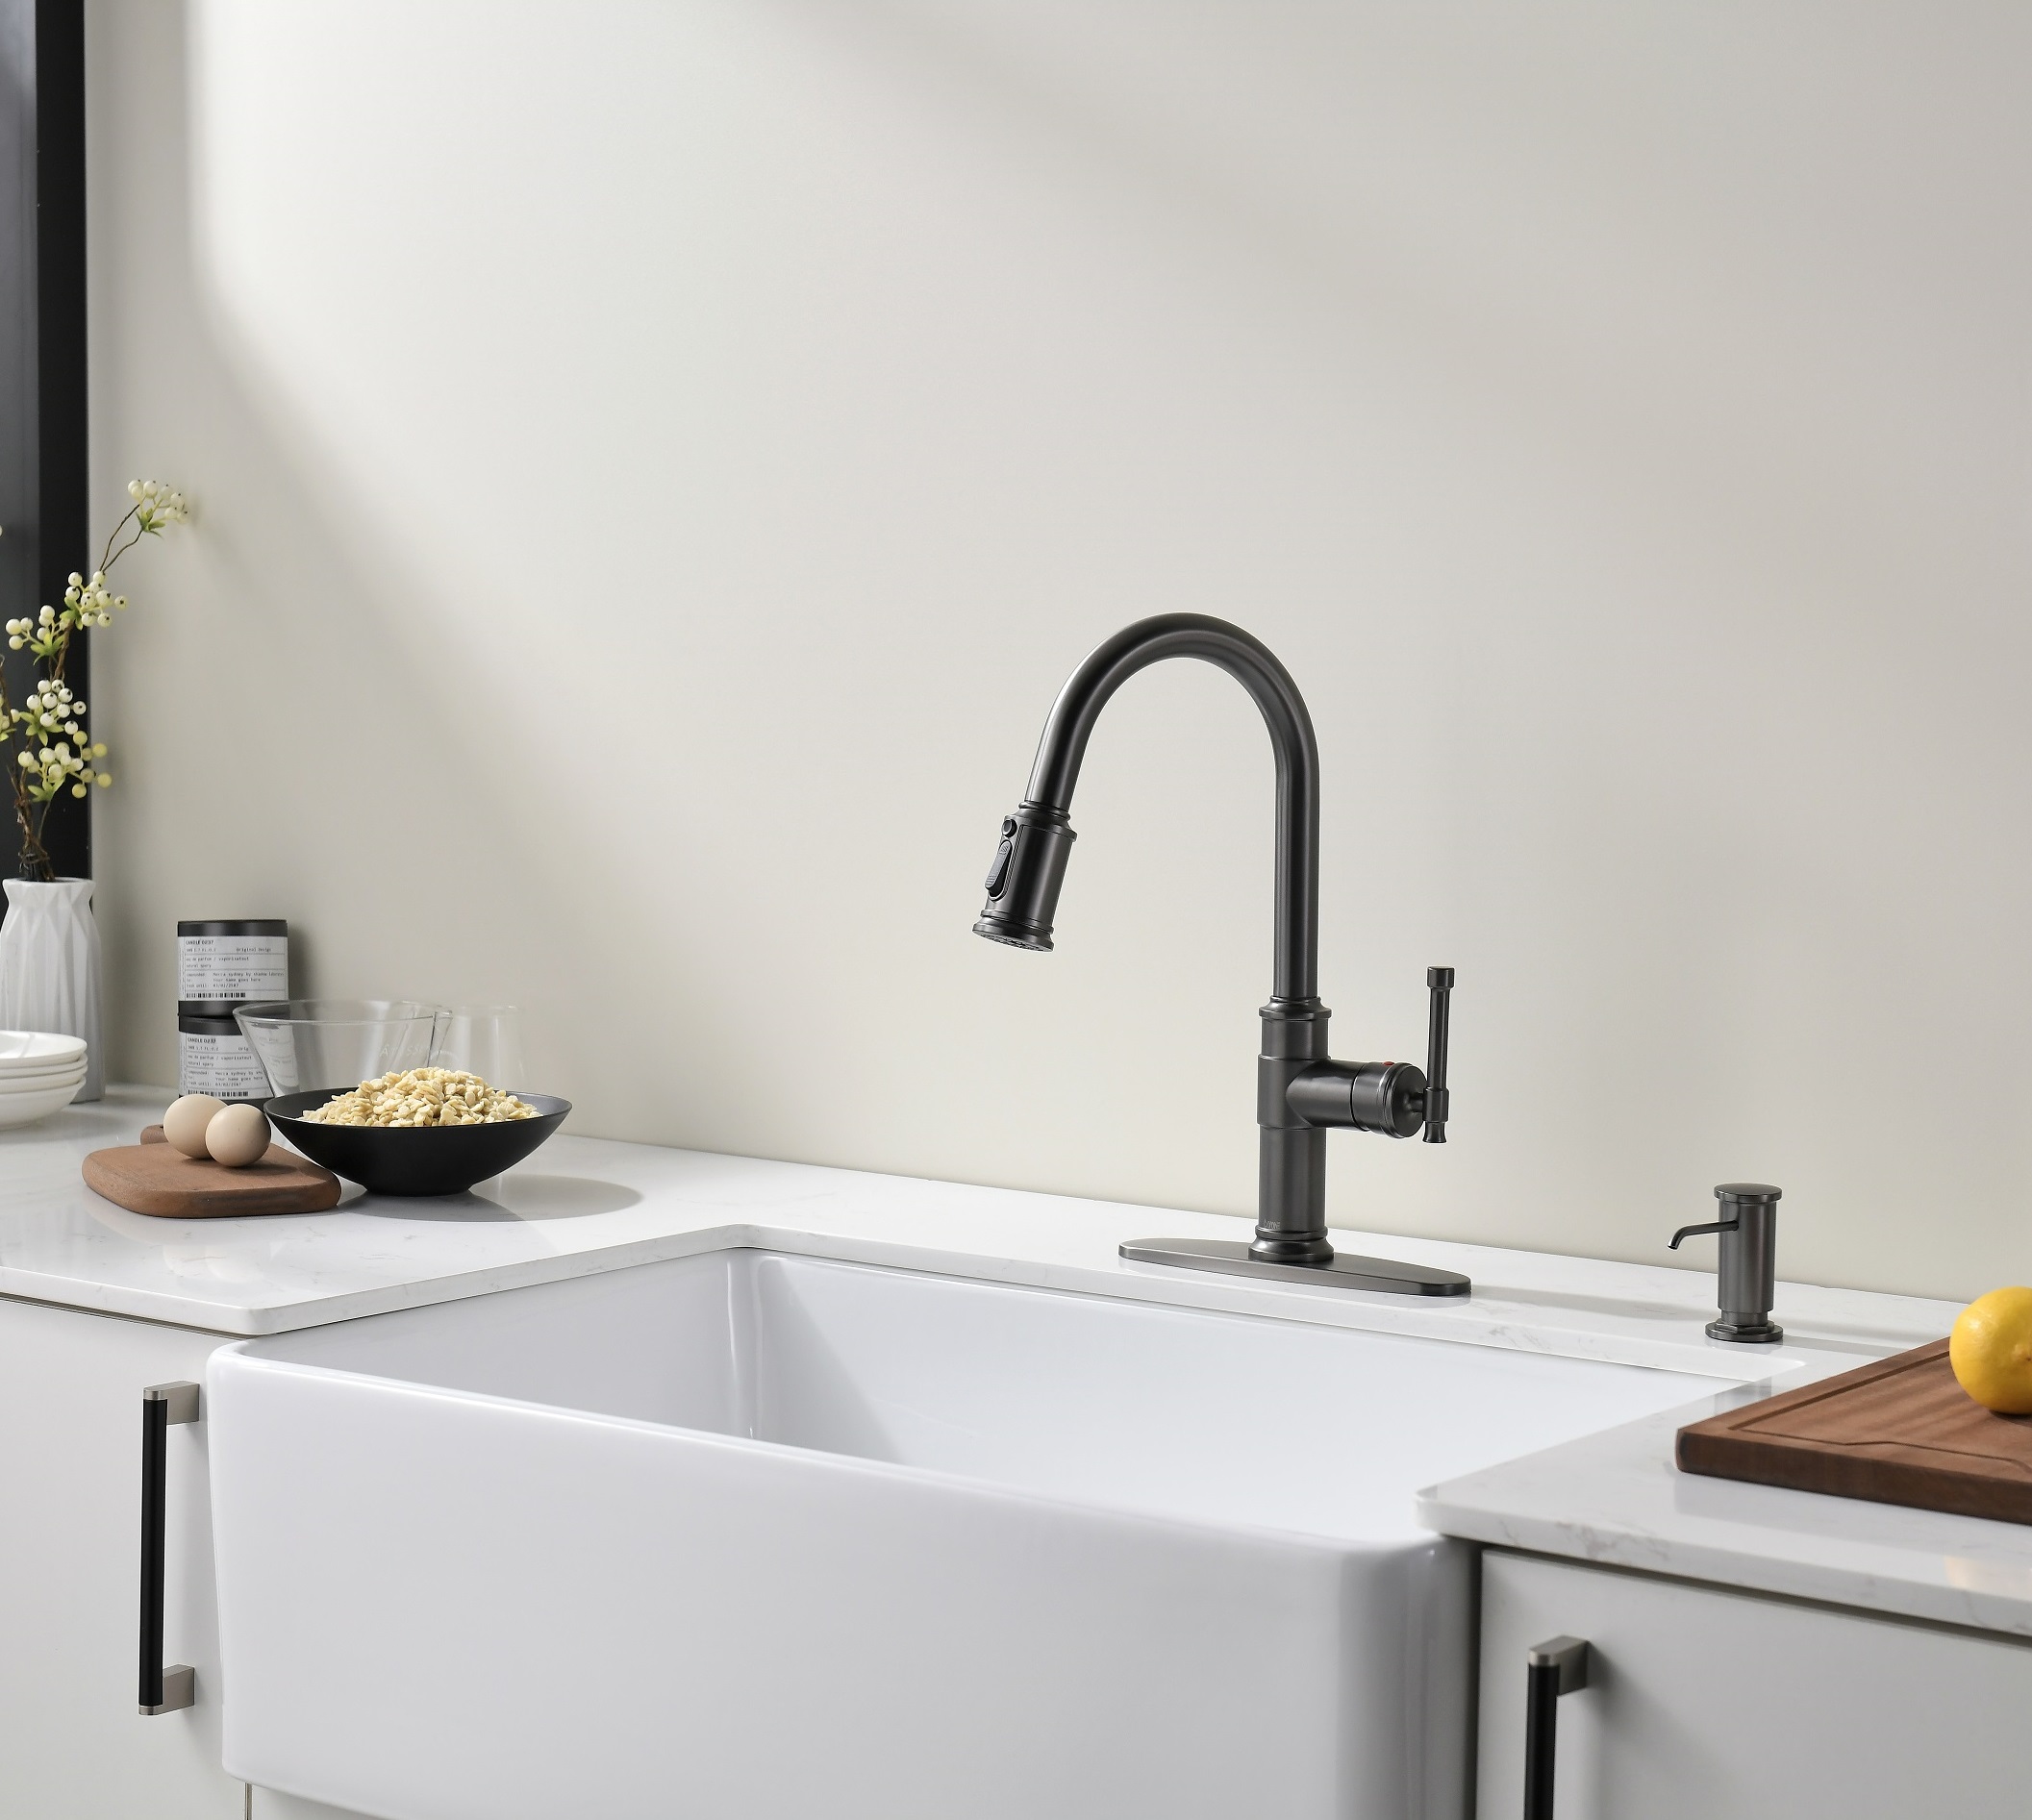 Black Stainless Steel Antique Pull-Down Kitchen Faucet with Soap Dispenser